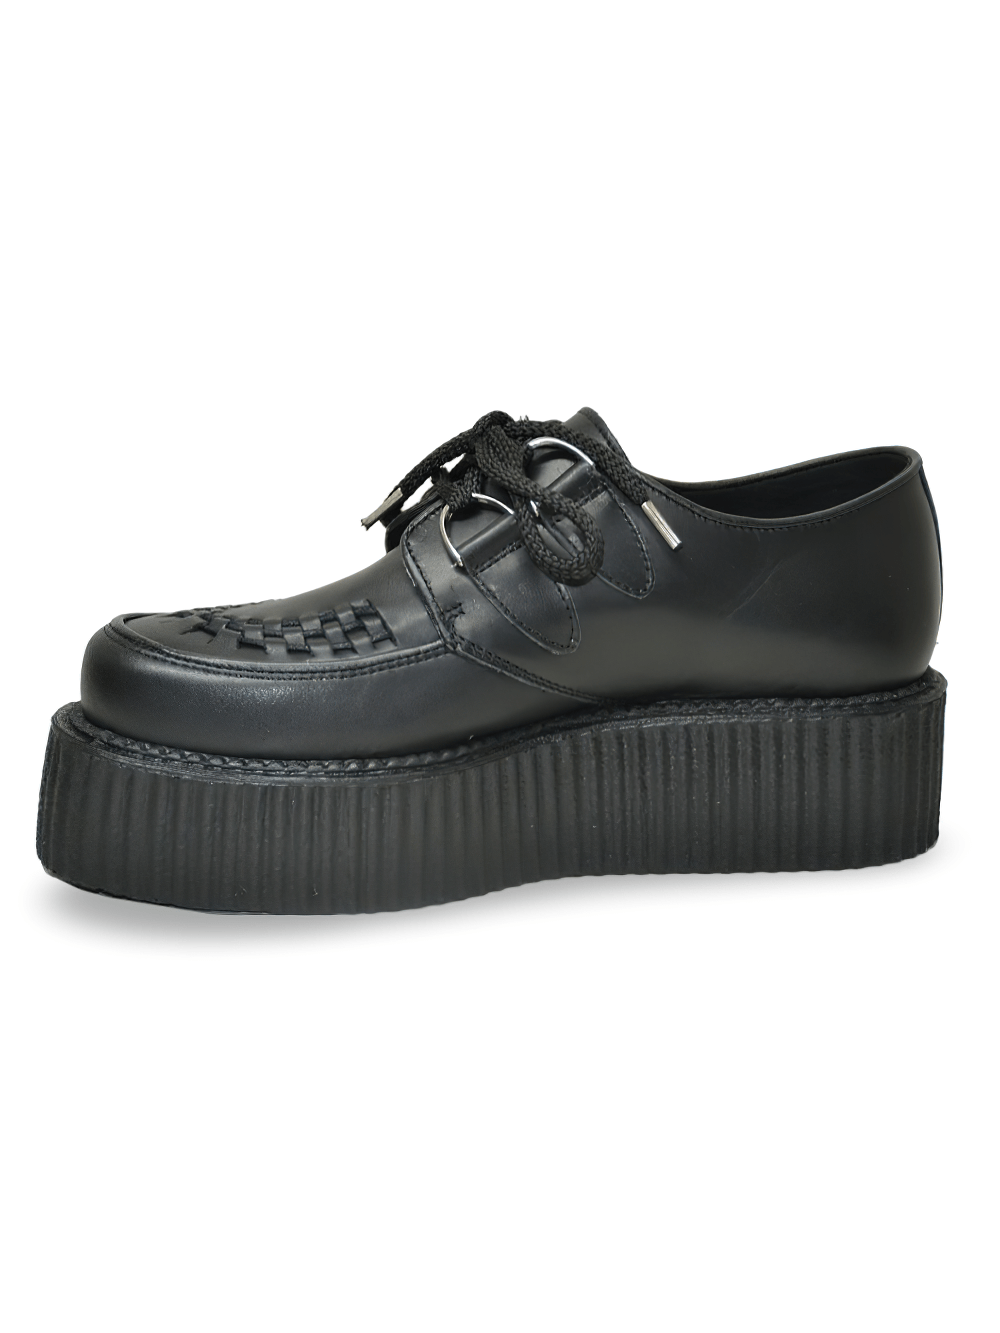 Grained Leather Black Creepers with Round Toe